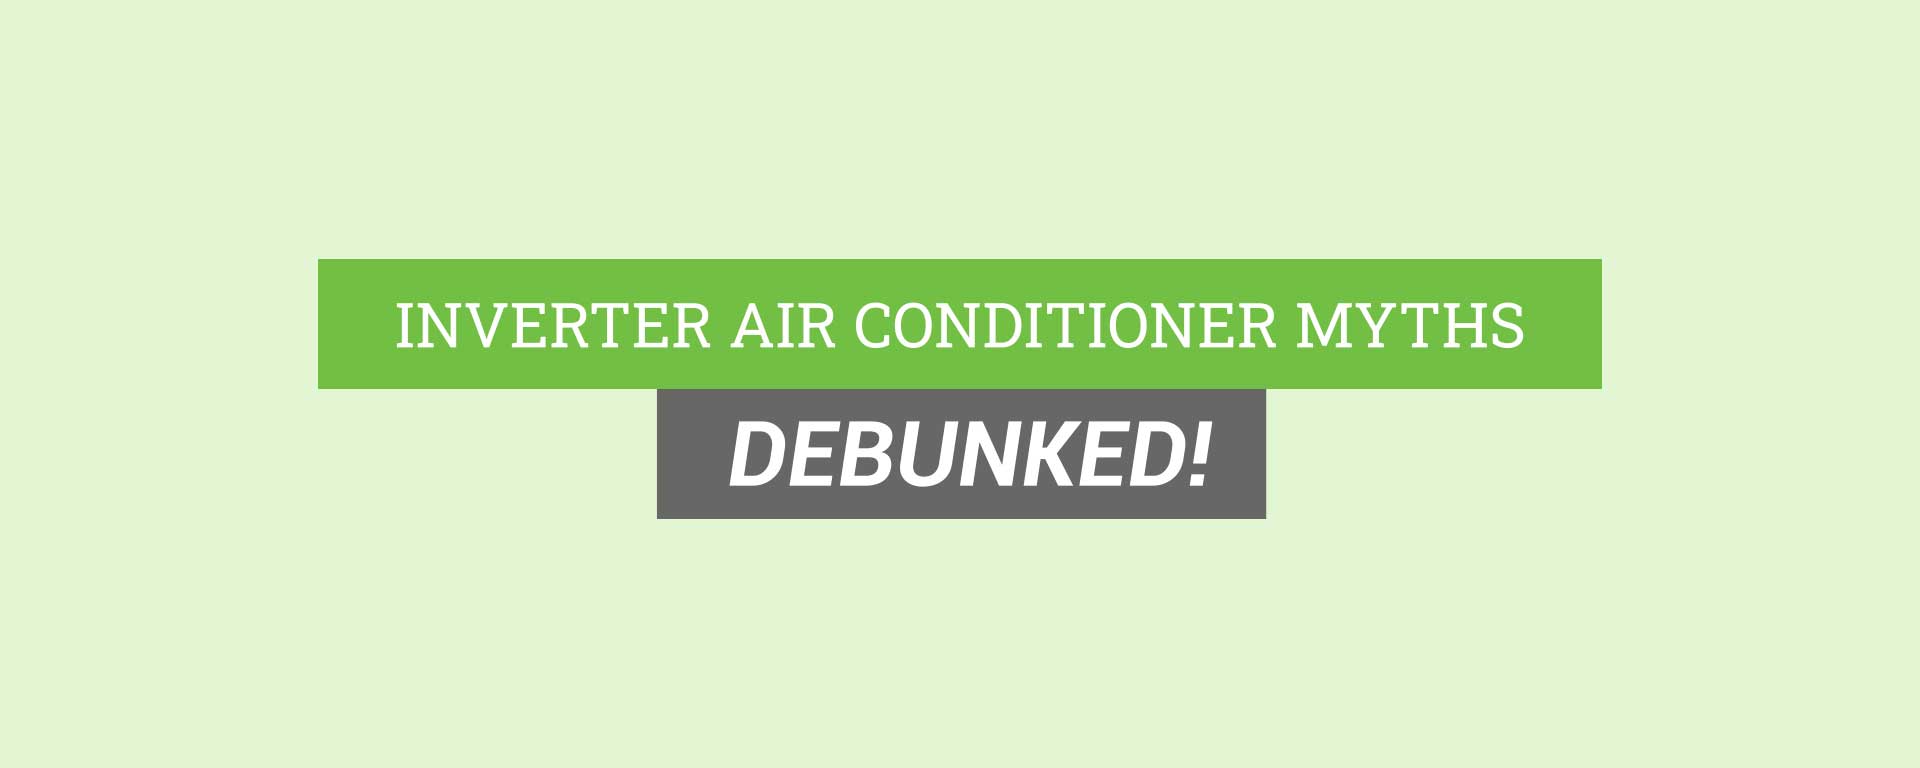 myths about inverter air conditioners